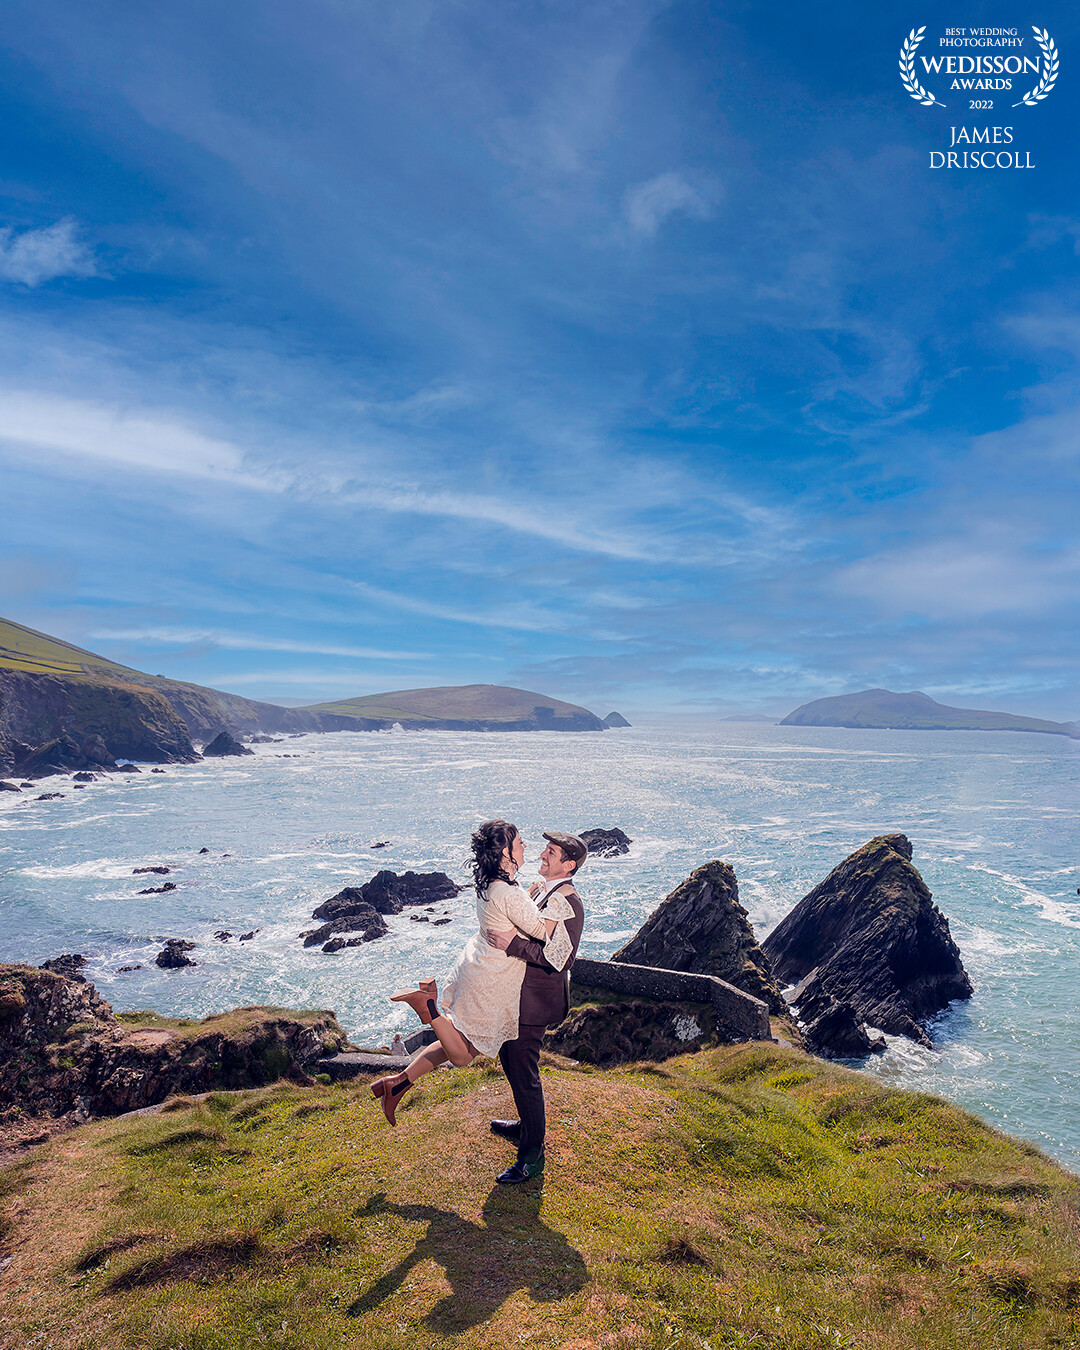 Shane & Karen down at Cé Dhún Chaoin / Dunquin Pier, Shane Australian born married Irish born Karen,, We travlled all around dingle selecting areas to shoot at on this day... A ton more epic locations from this wedding...<br />
Thanks wedissons....